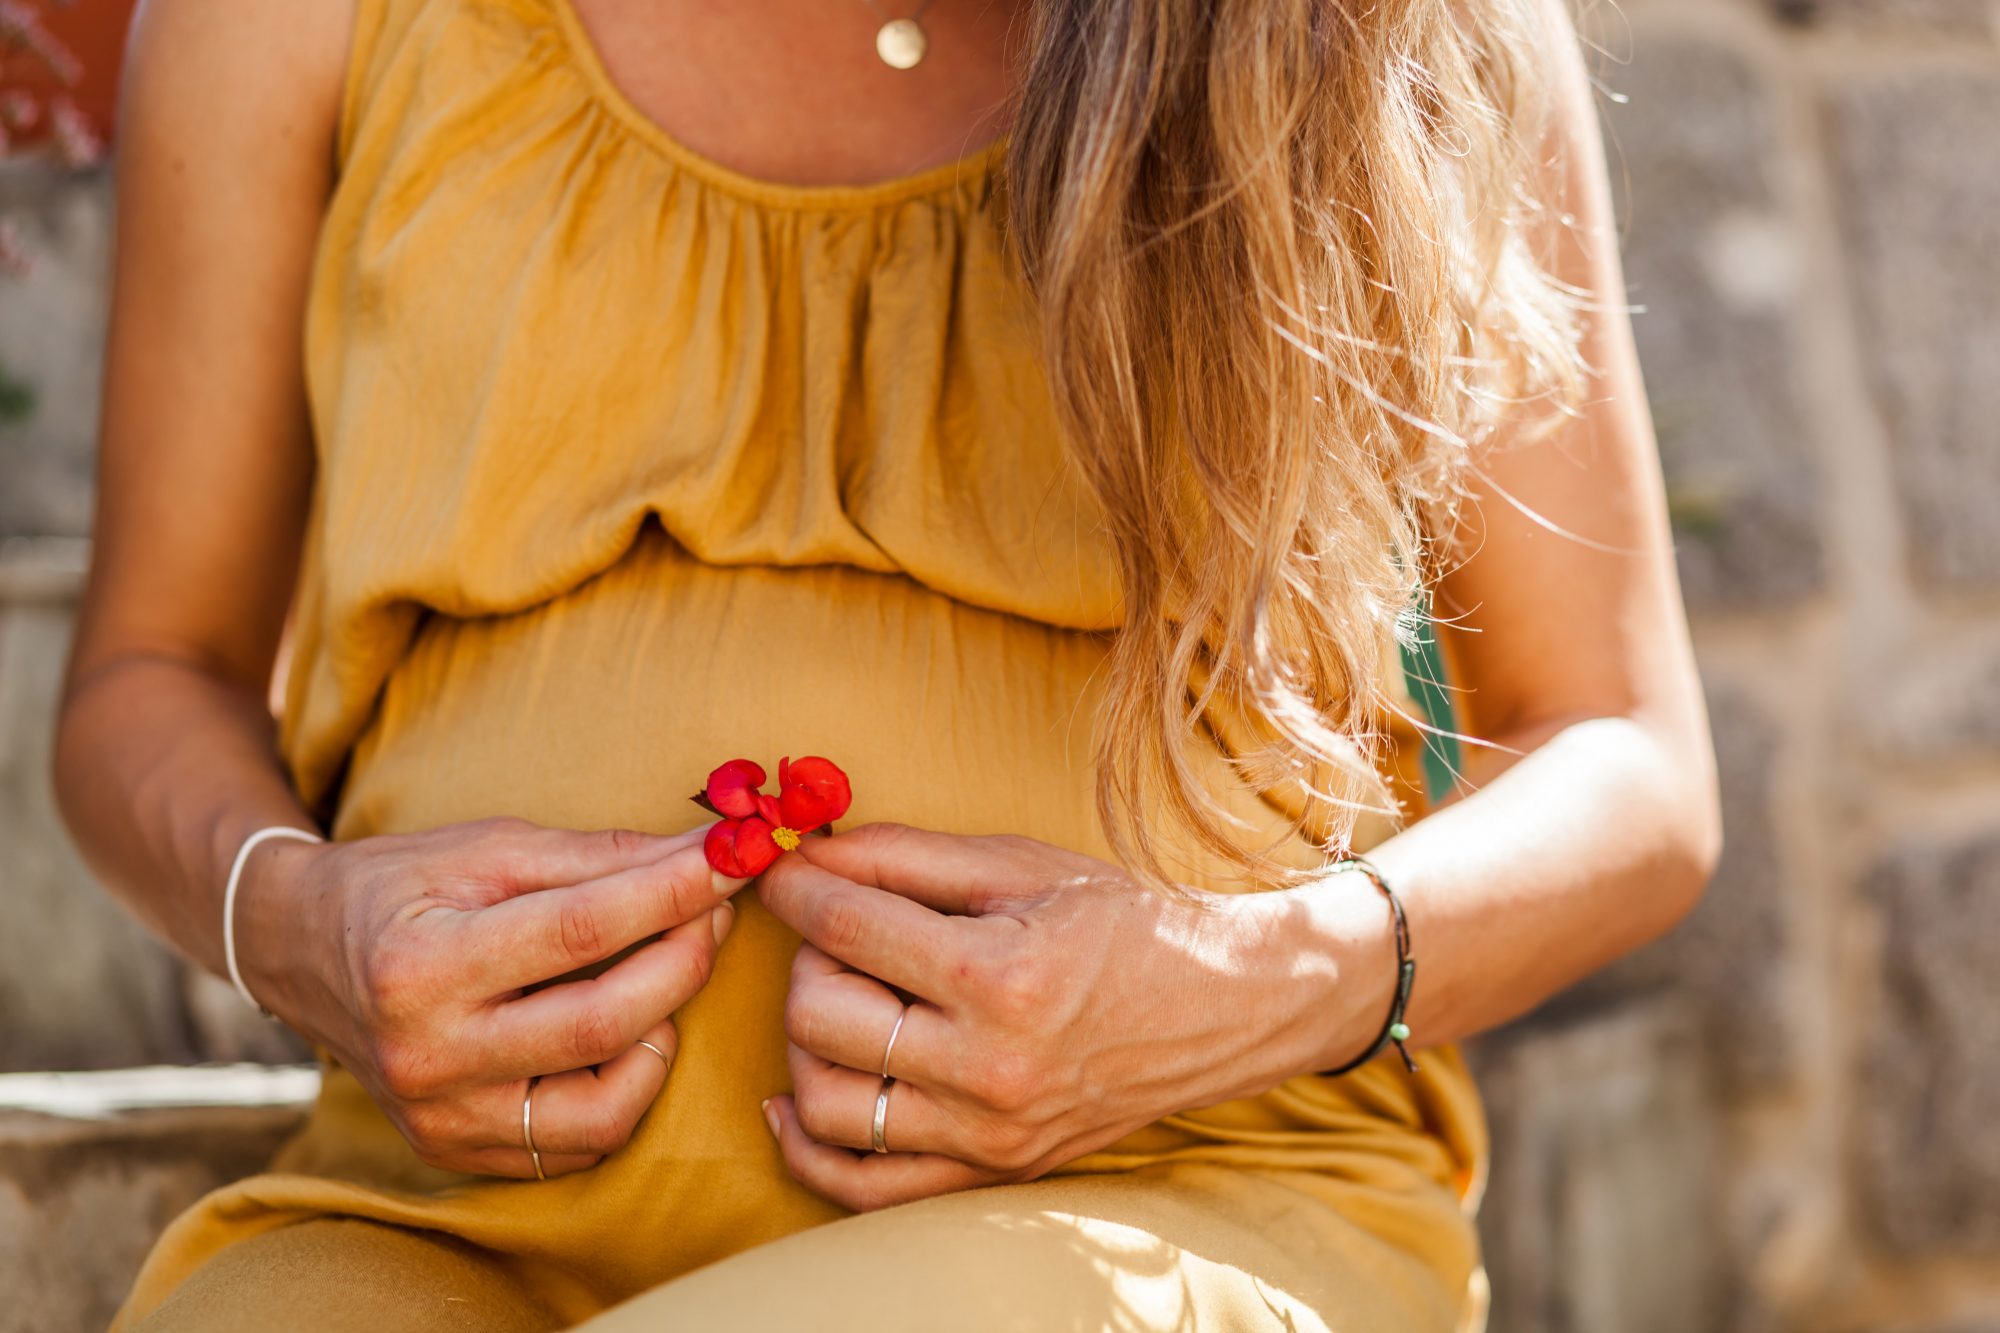 An image of a pregnant woman holding a flower.